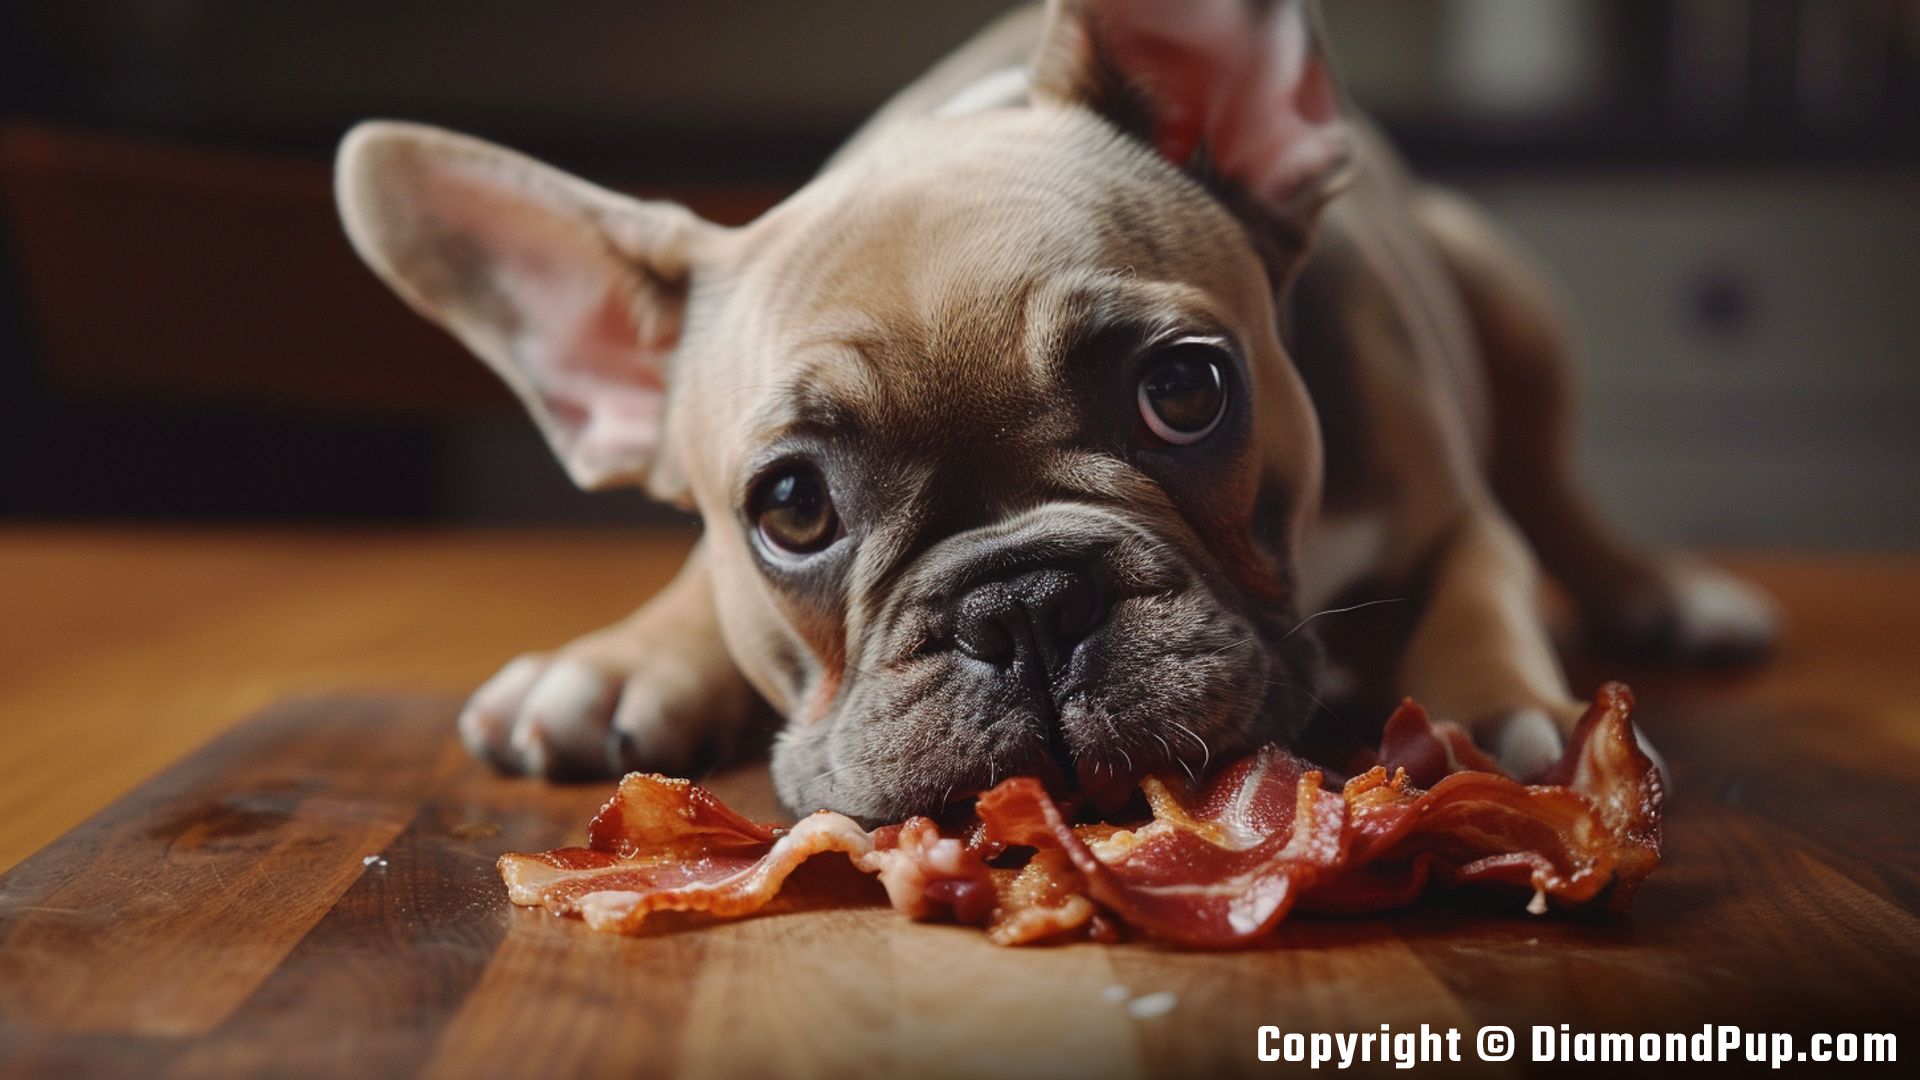 Photograph of a Happy French Bulldog Eating Bacon